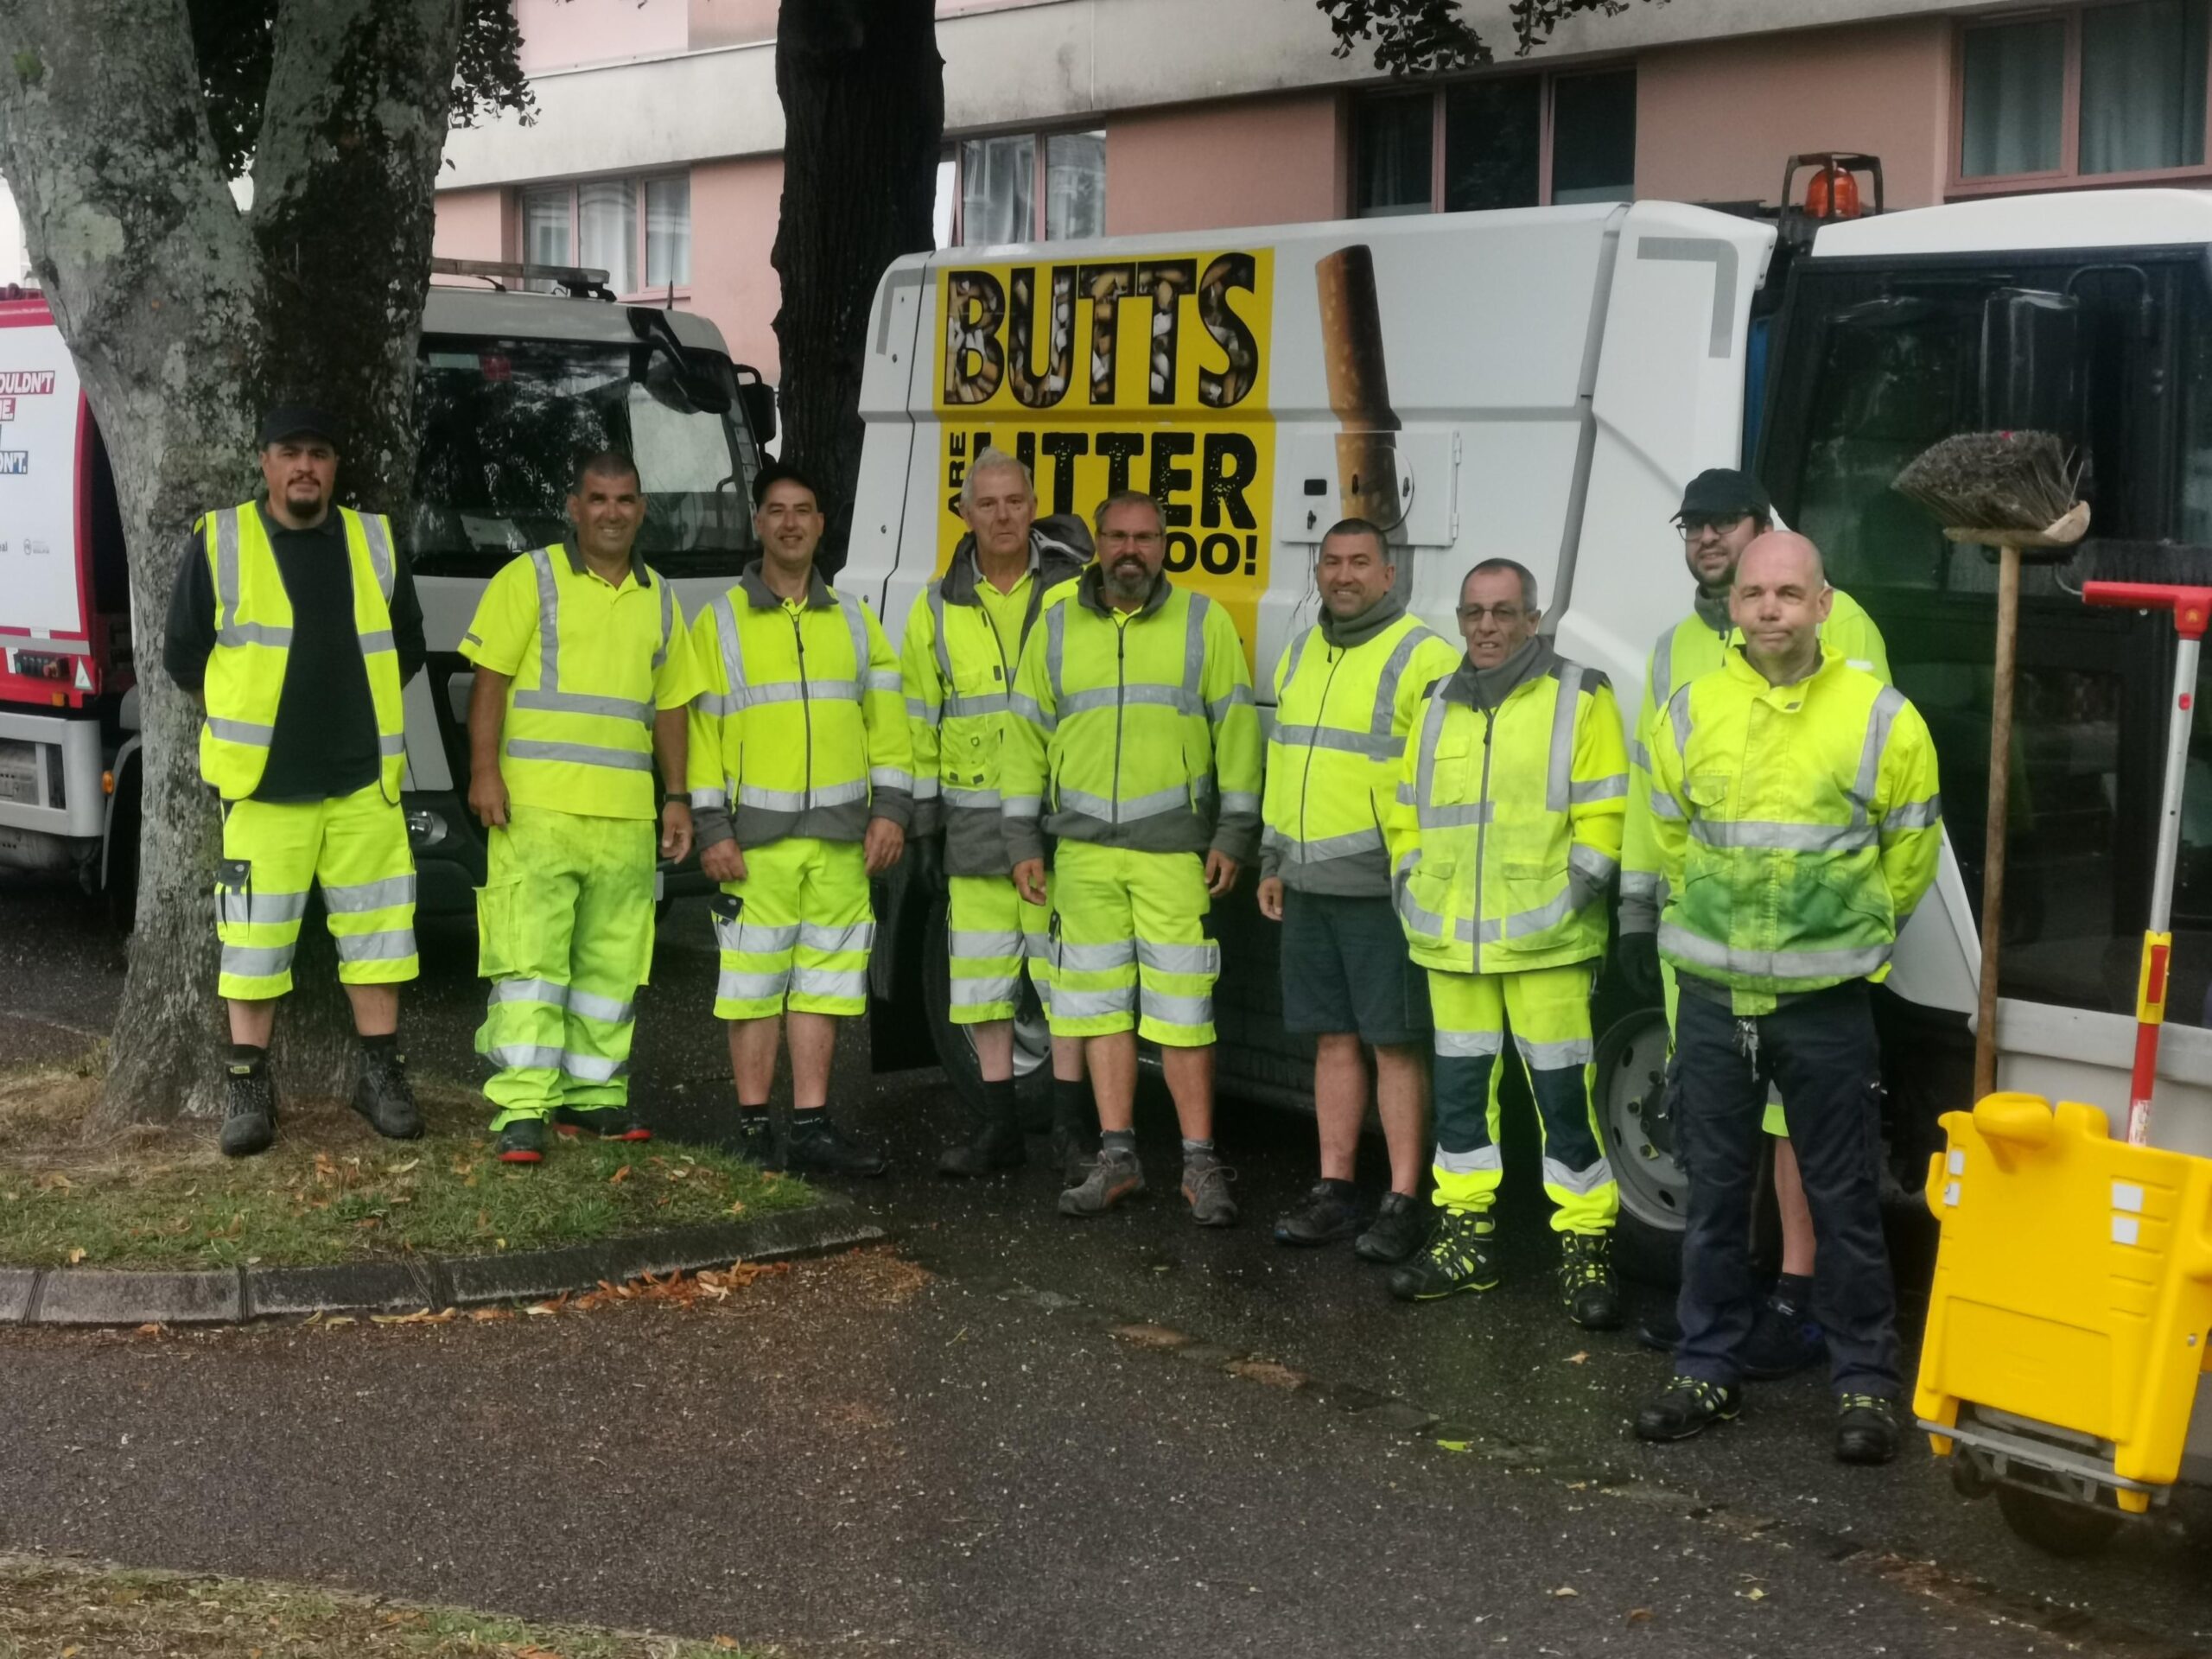 St Helier street-cleaning services